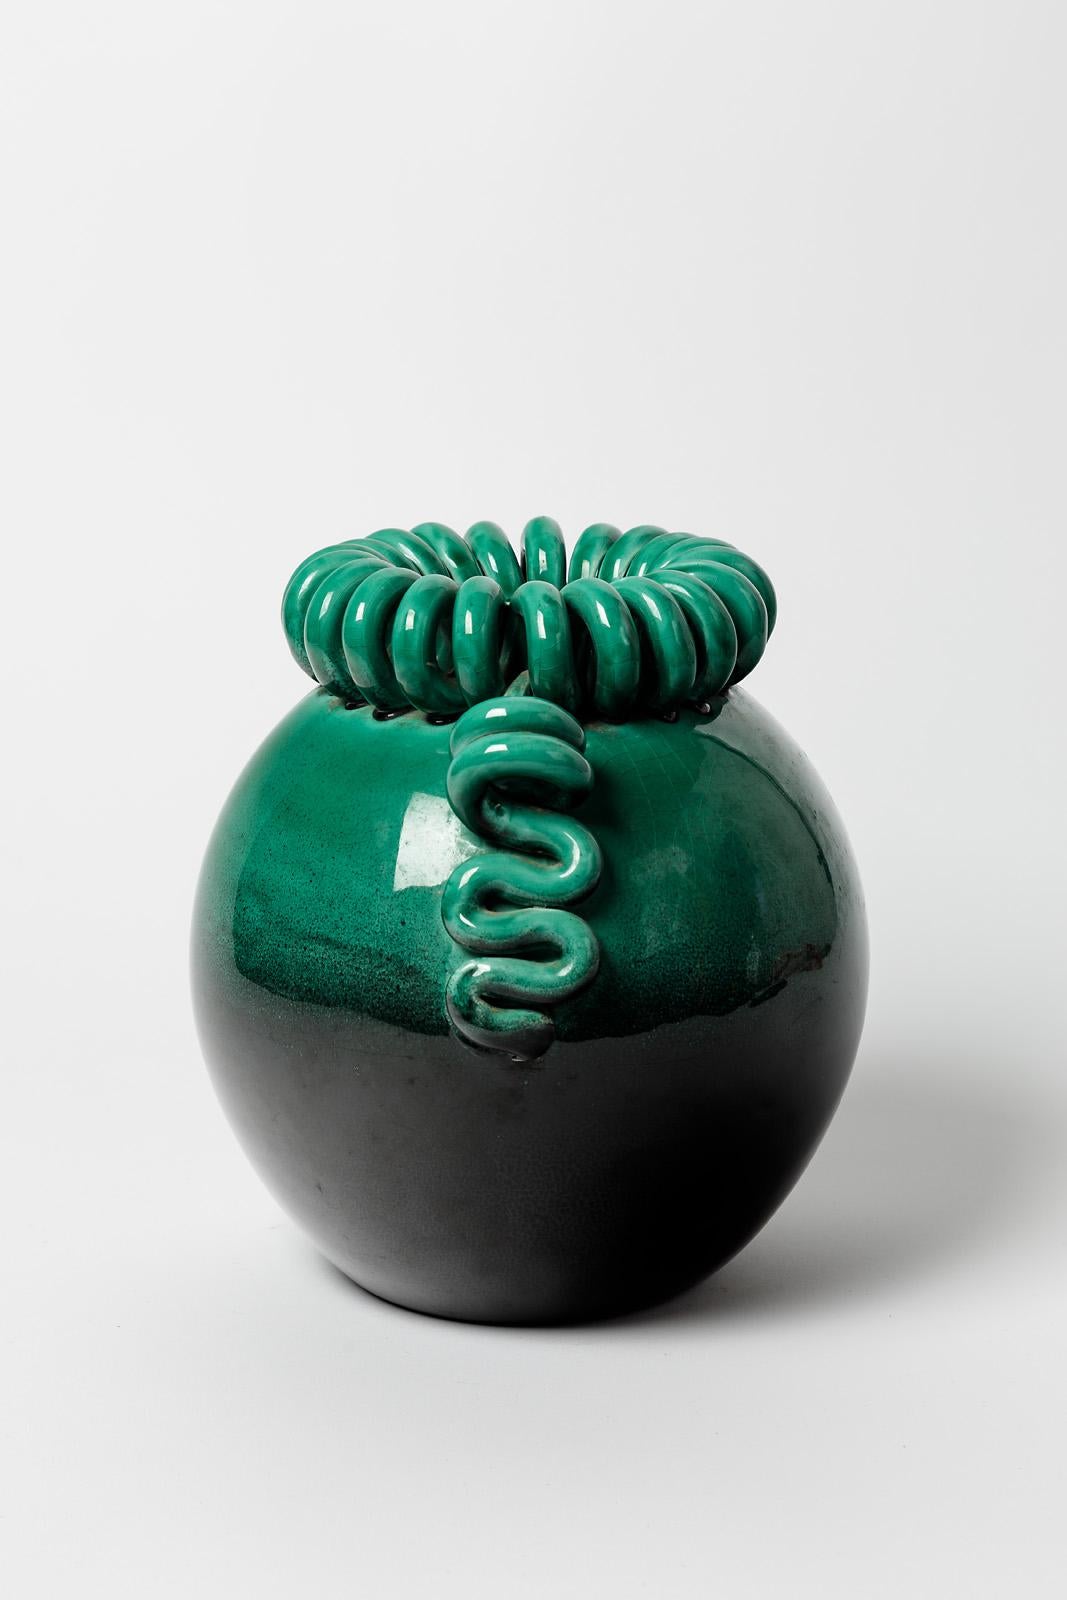 Large 20th Century Green and Black Ceramic Vase by Gustave Asch Art Deco 1940 For Sale 1